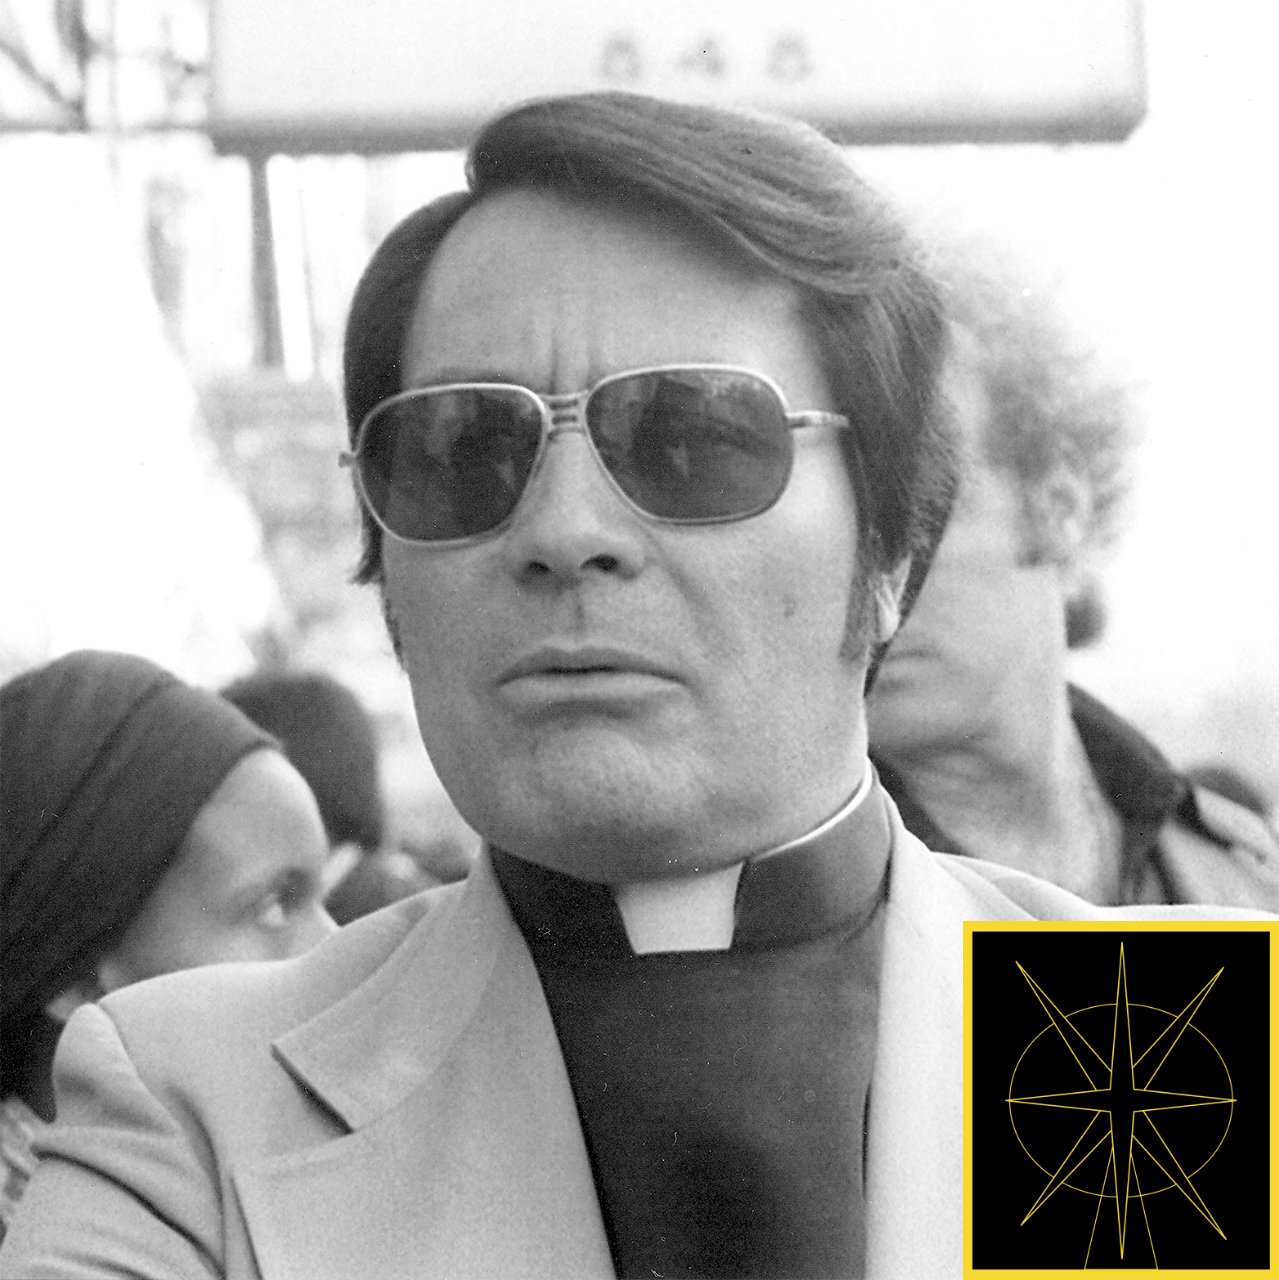 People’s Temple cult leader Jim Jones wearing sunglasses and a clerical collar. In the bottom right corner of the image is a logo of People’s Temple represented by a yellow star in a circle on a black background.